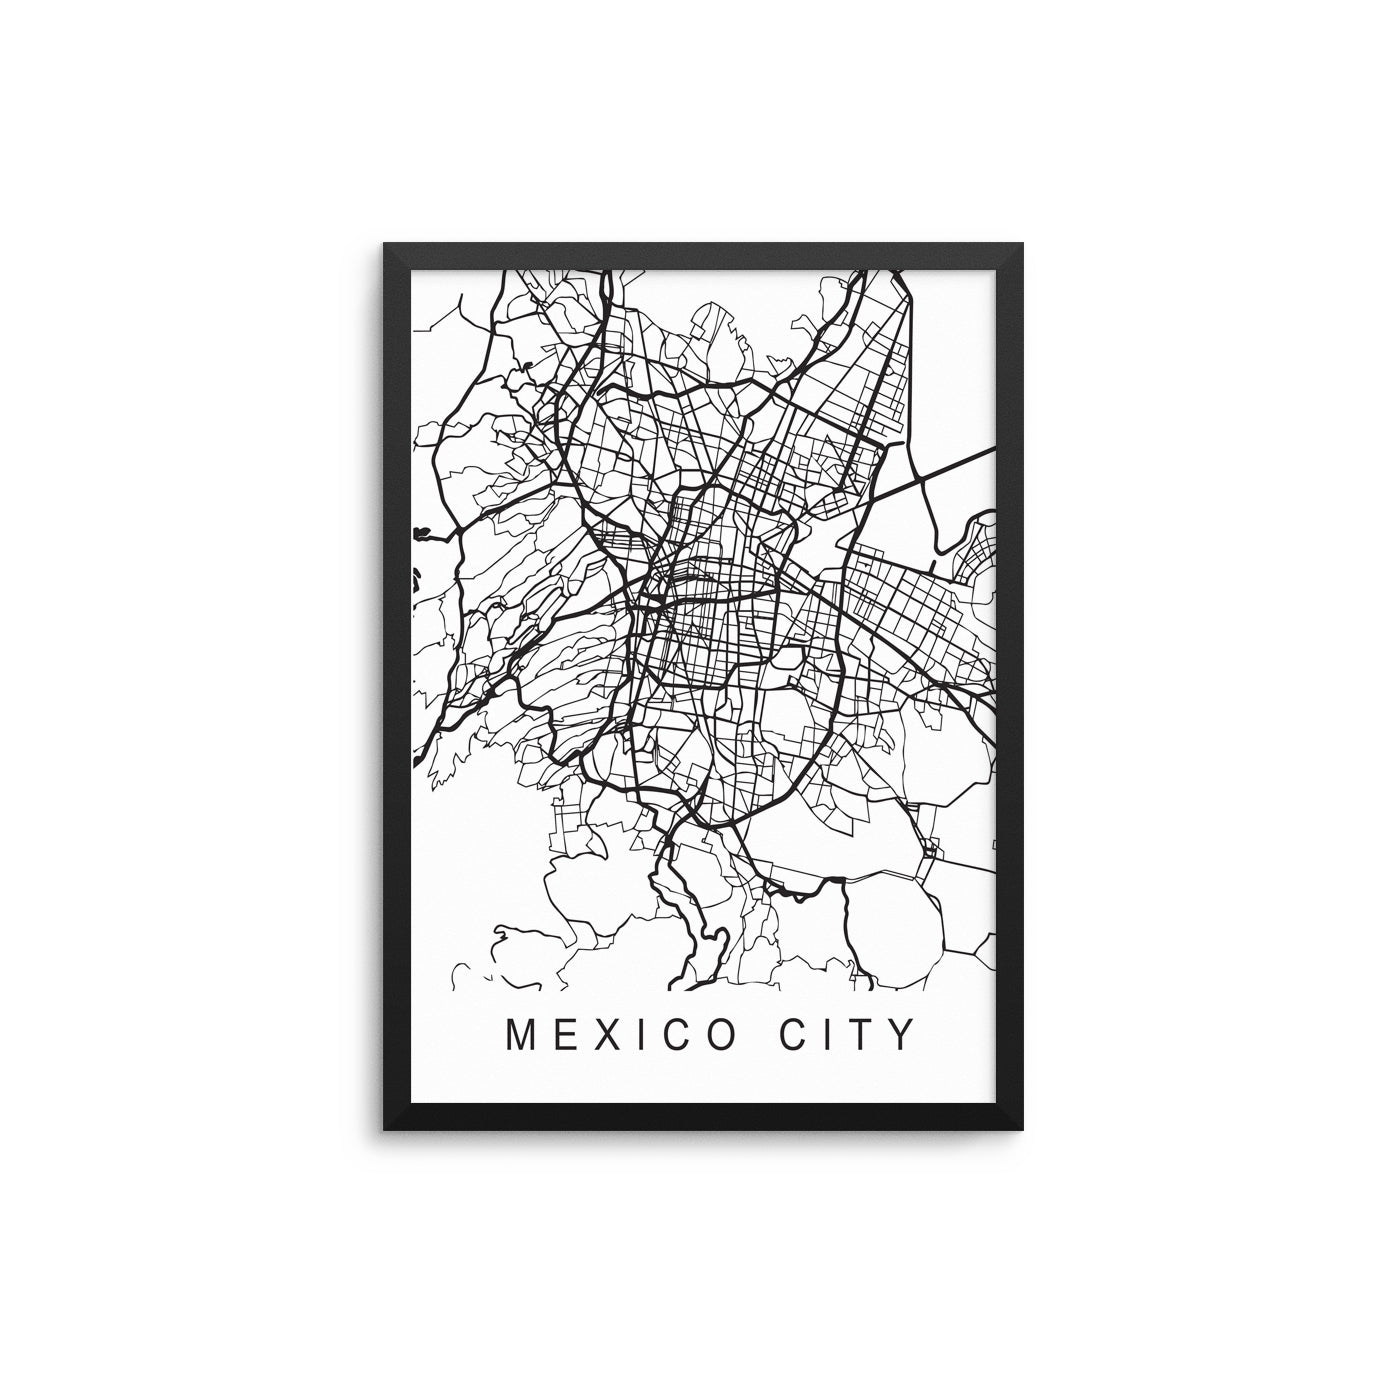 Mexico City Outline Map - D'Luxe Prints